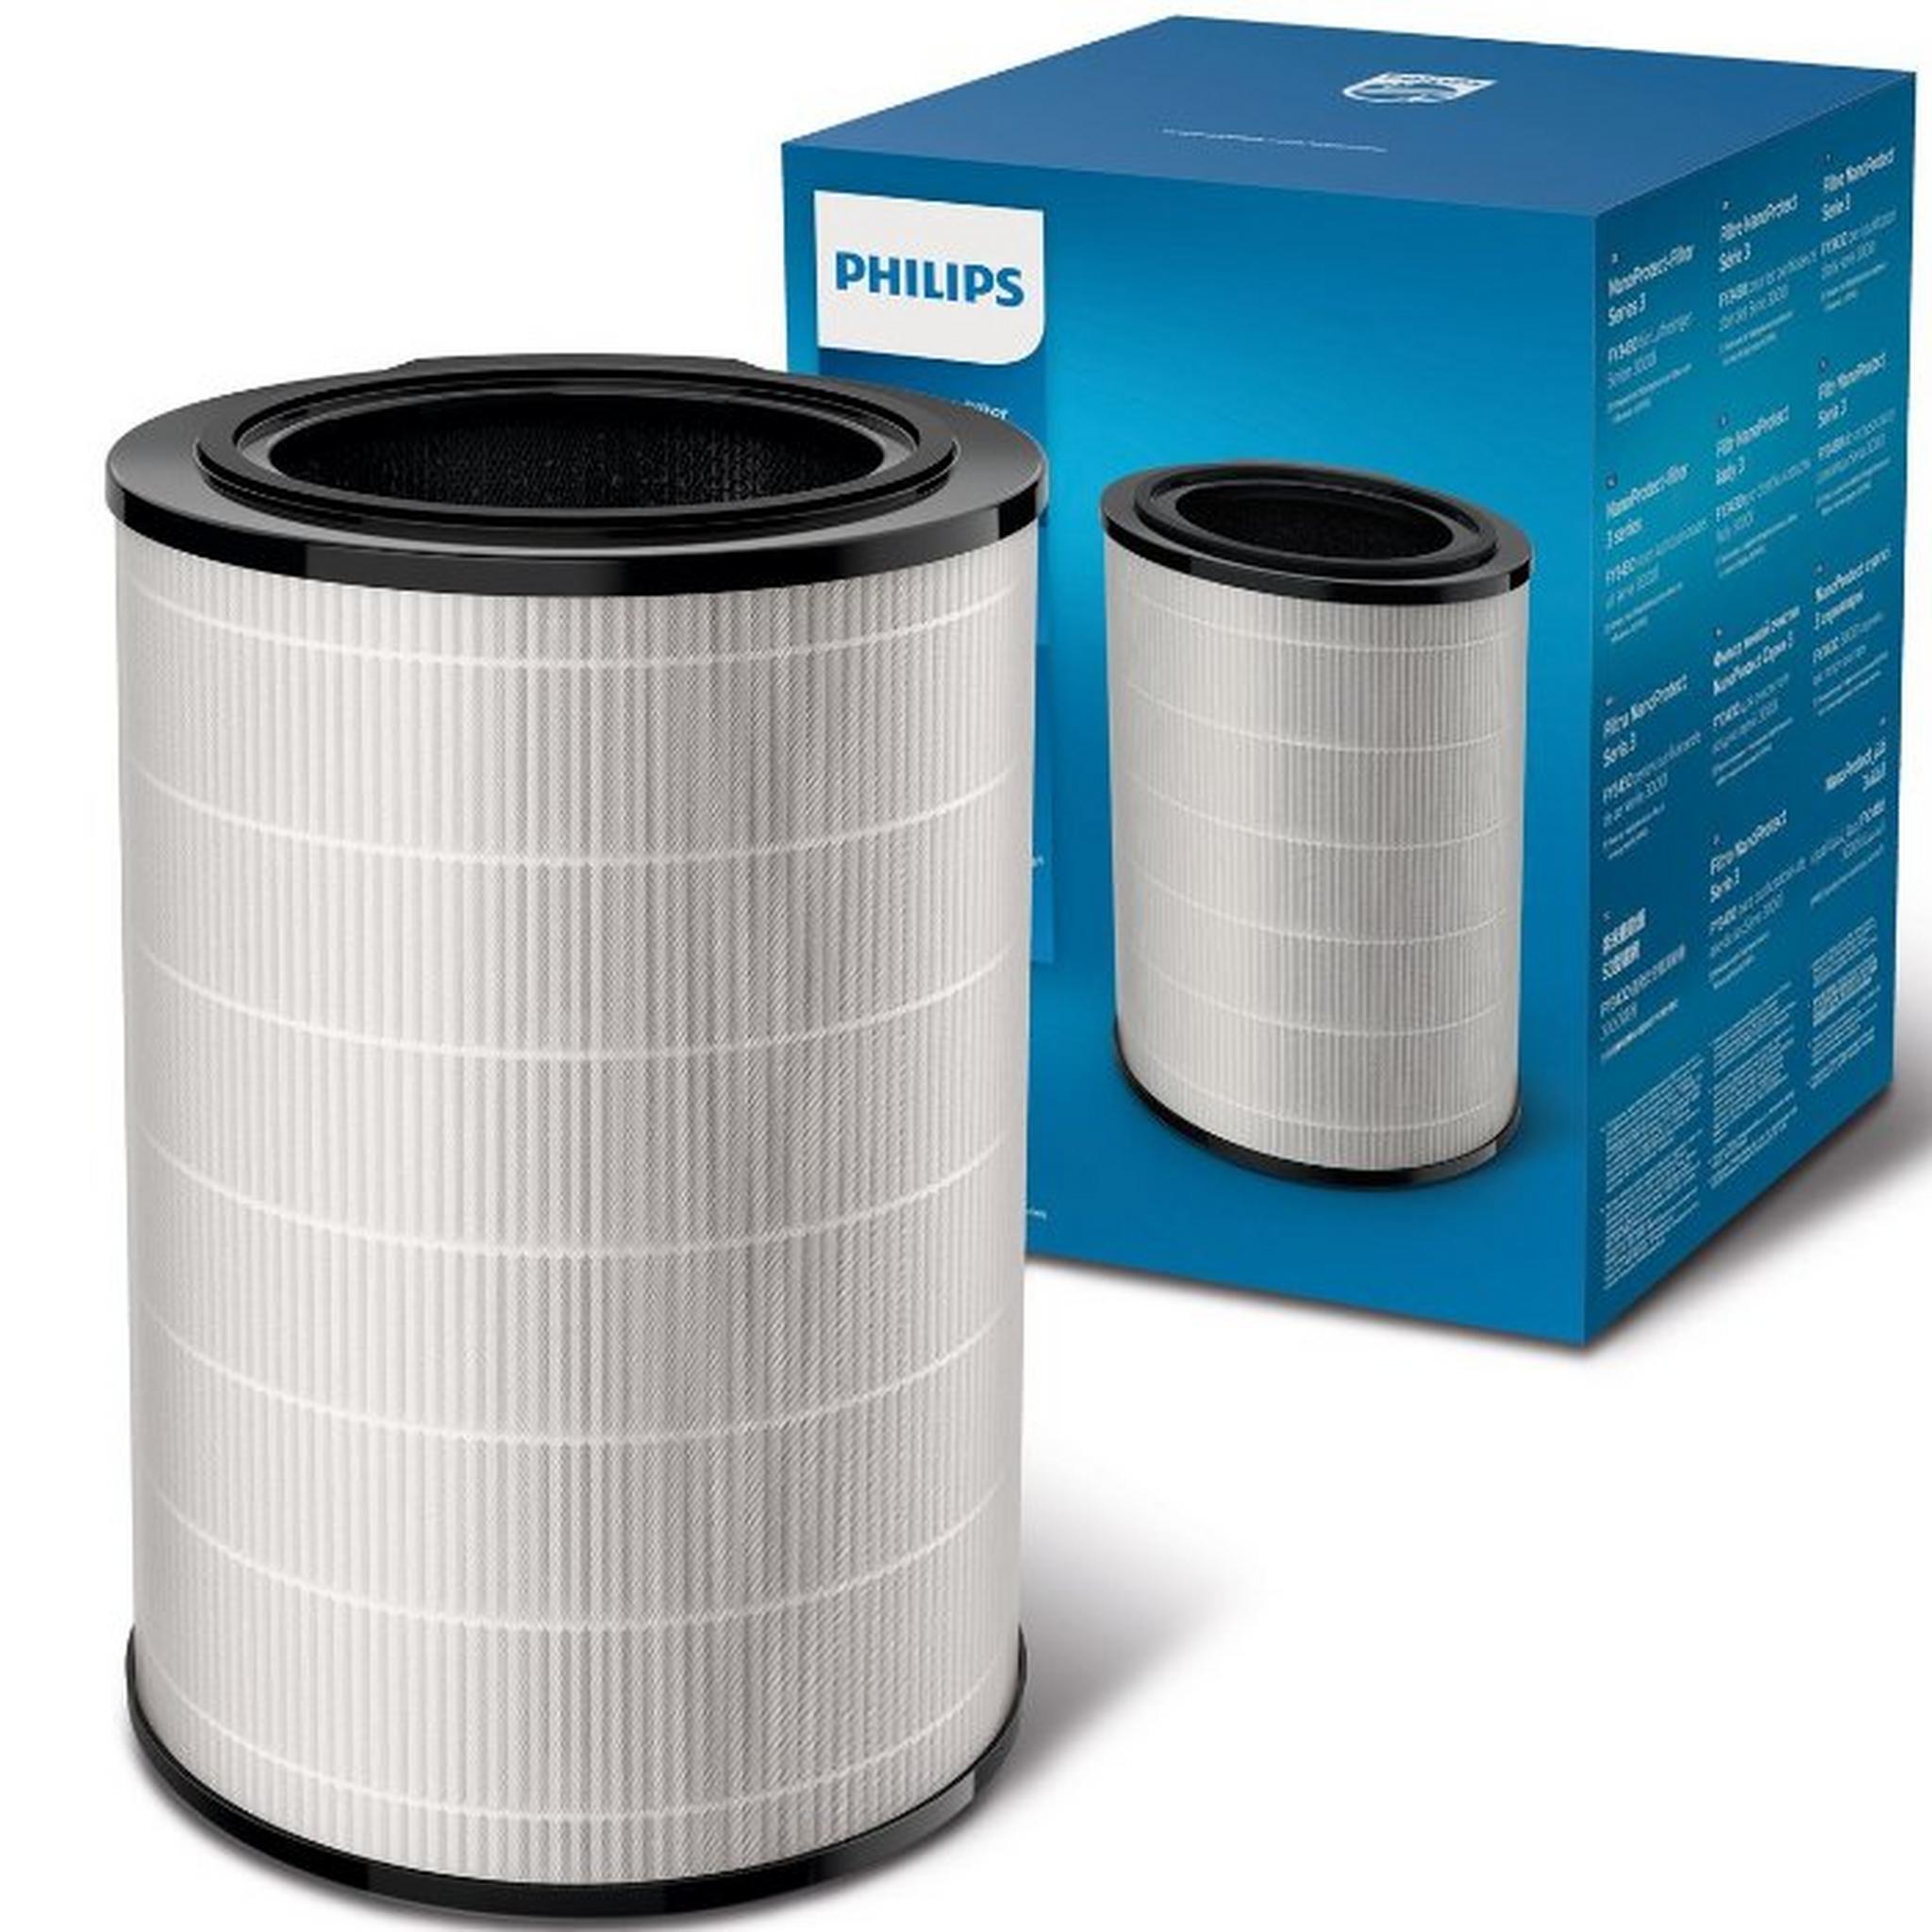 Philips Nanoprotect Dust/Bacteria Filter Series 3 for Air Purifier Series 3000i, FY3430/30 - Silver